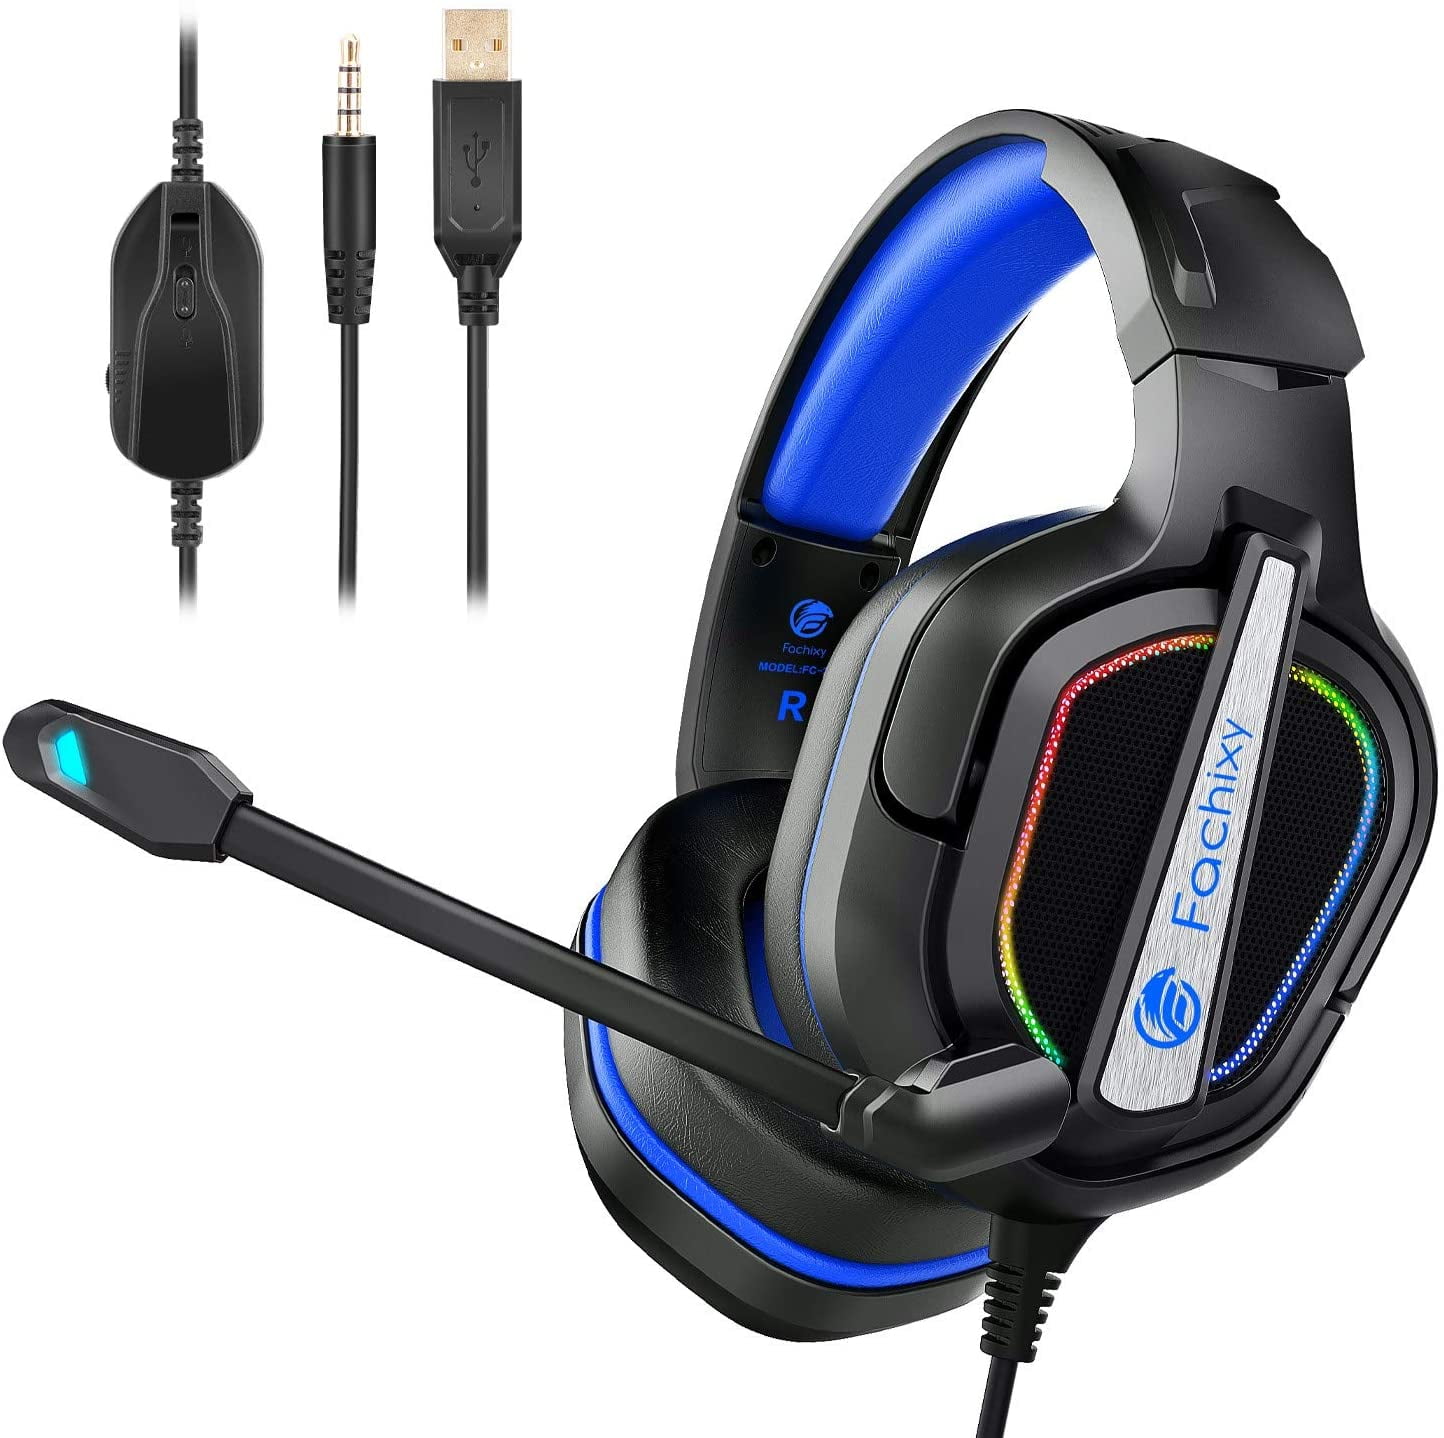  Pacrate Gaming Headset for PS5/PS4/Xbox One/Nintendo  Switch/PC/Mac, PS5 Headset with Microphone Xbox Headset with LED Lights,  Noise Cancelling PS4 Headset for Kids Adults - Blue : Electronics